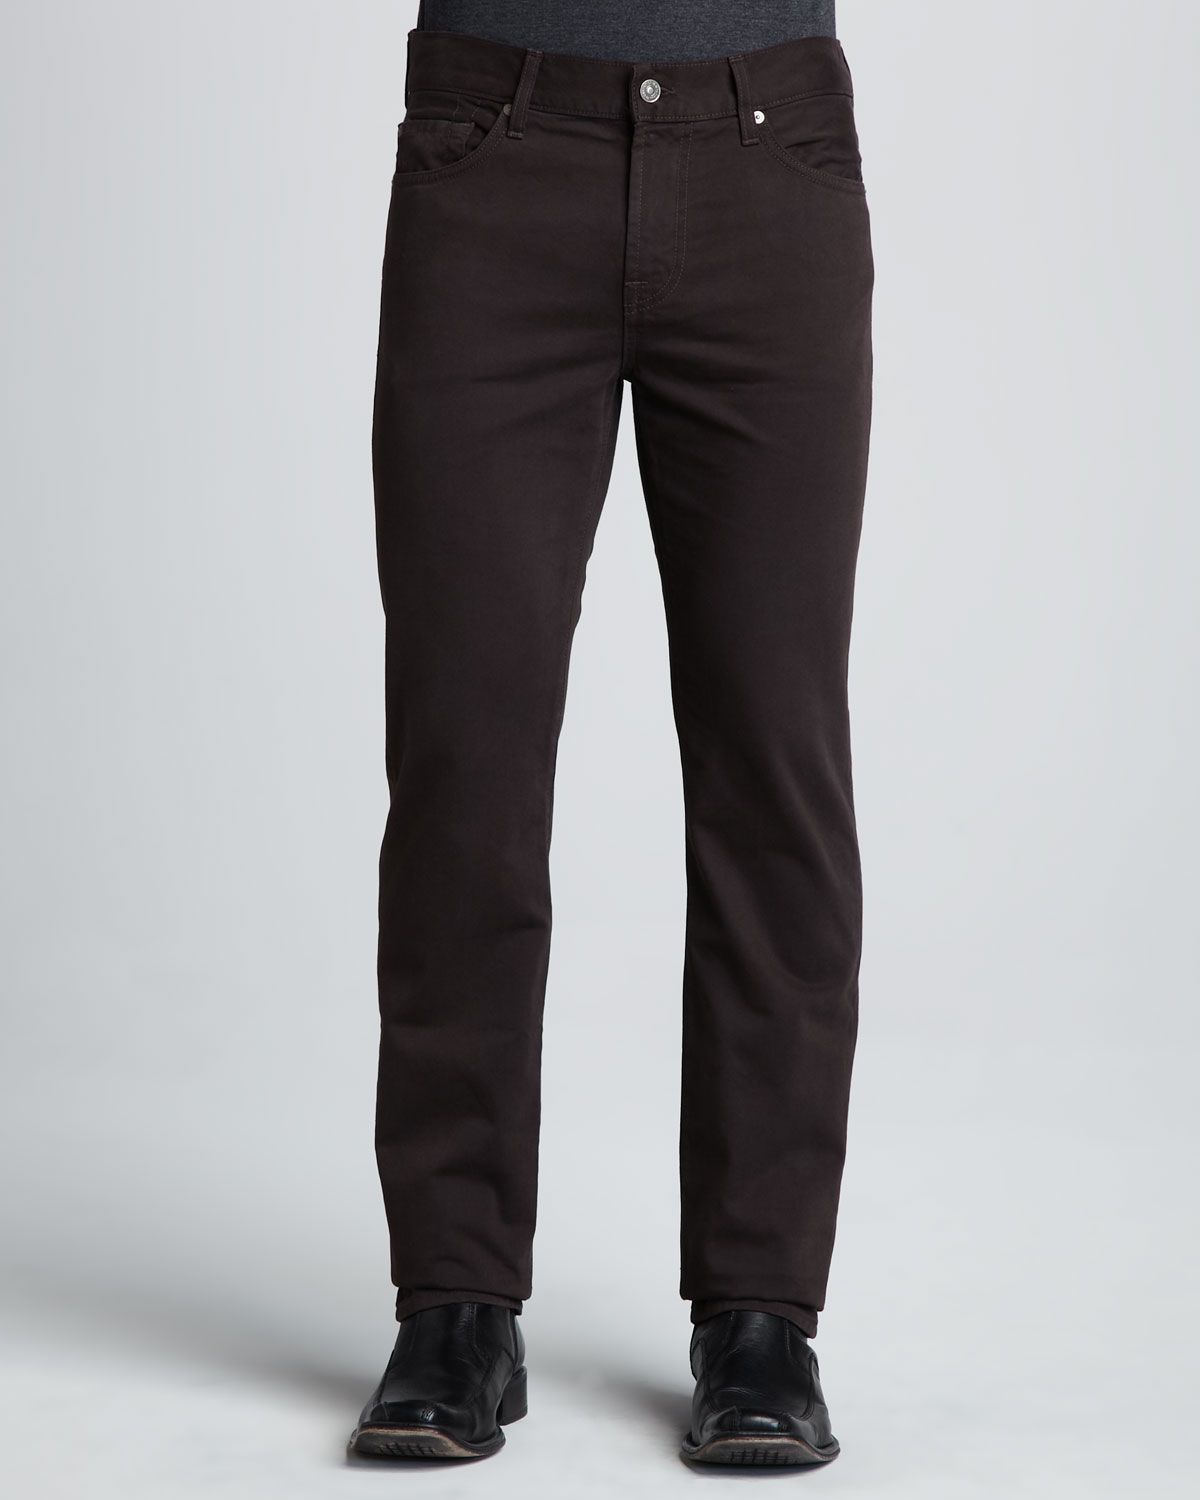 Lyst - 7 for all mankind Slimmy Dark Brown Twill Pants in Black for Men